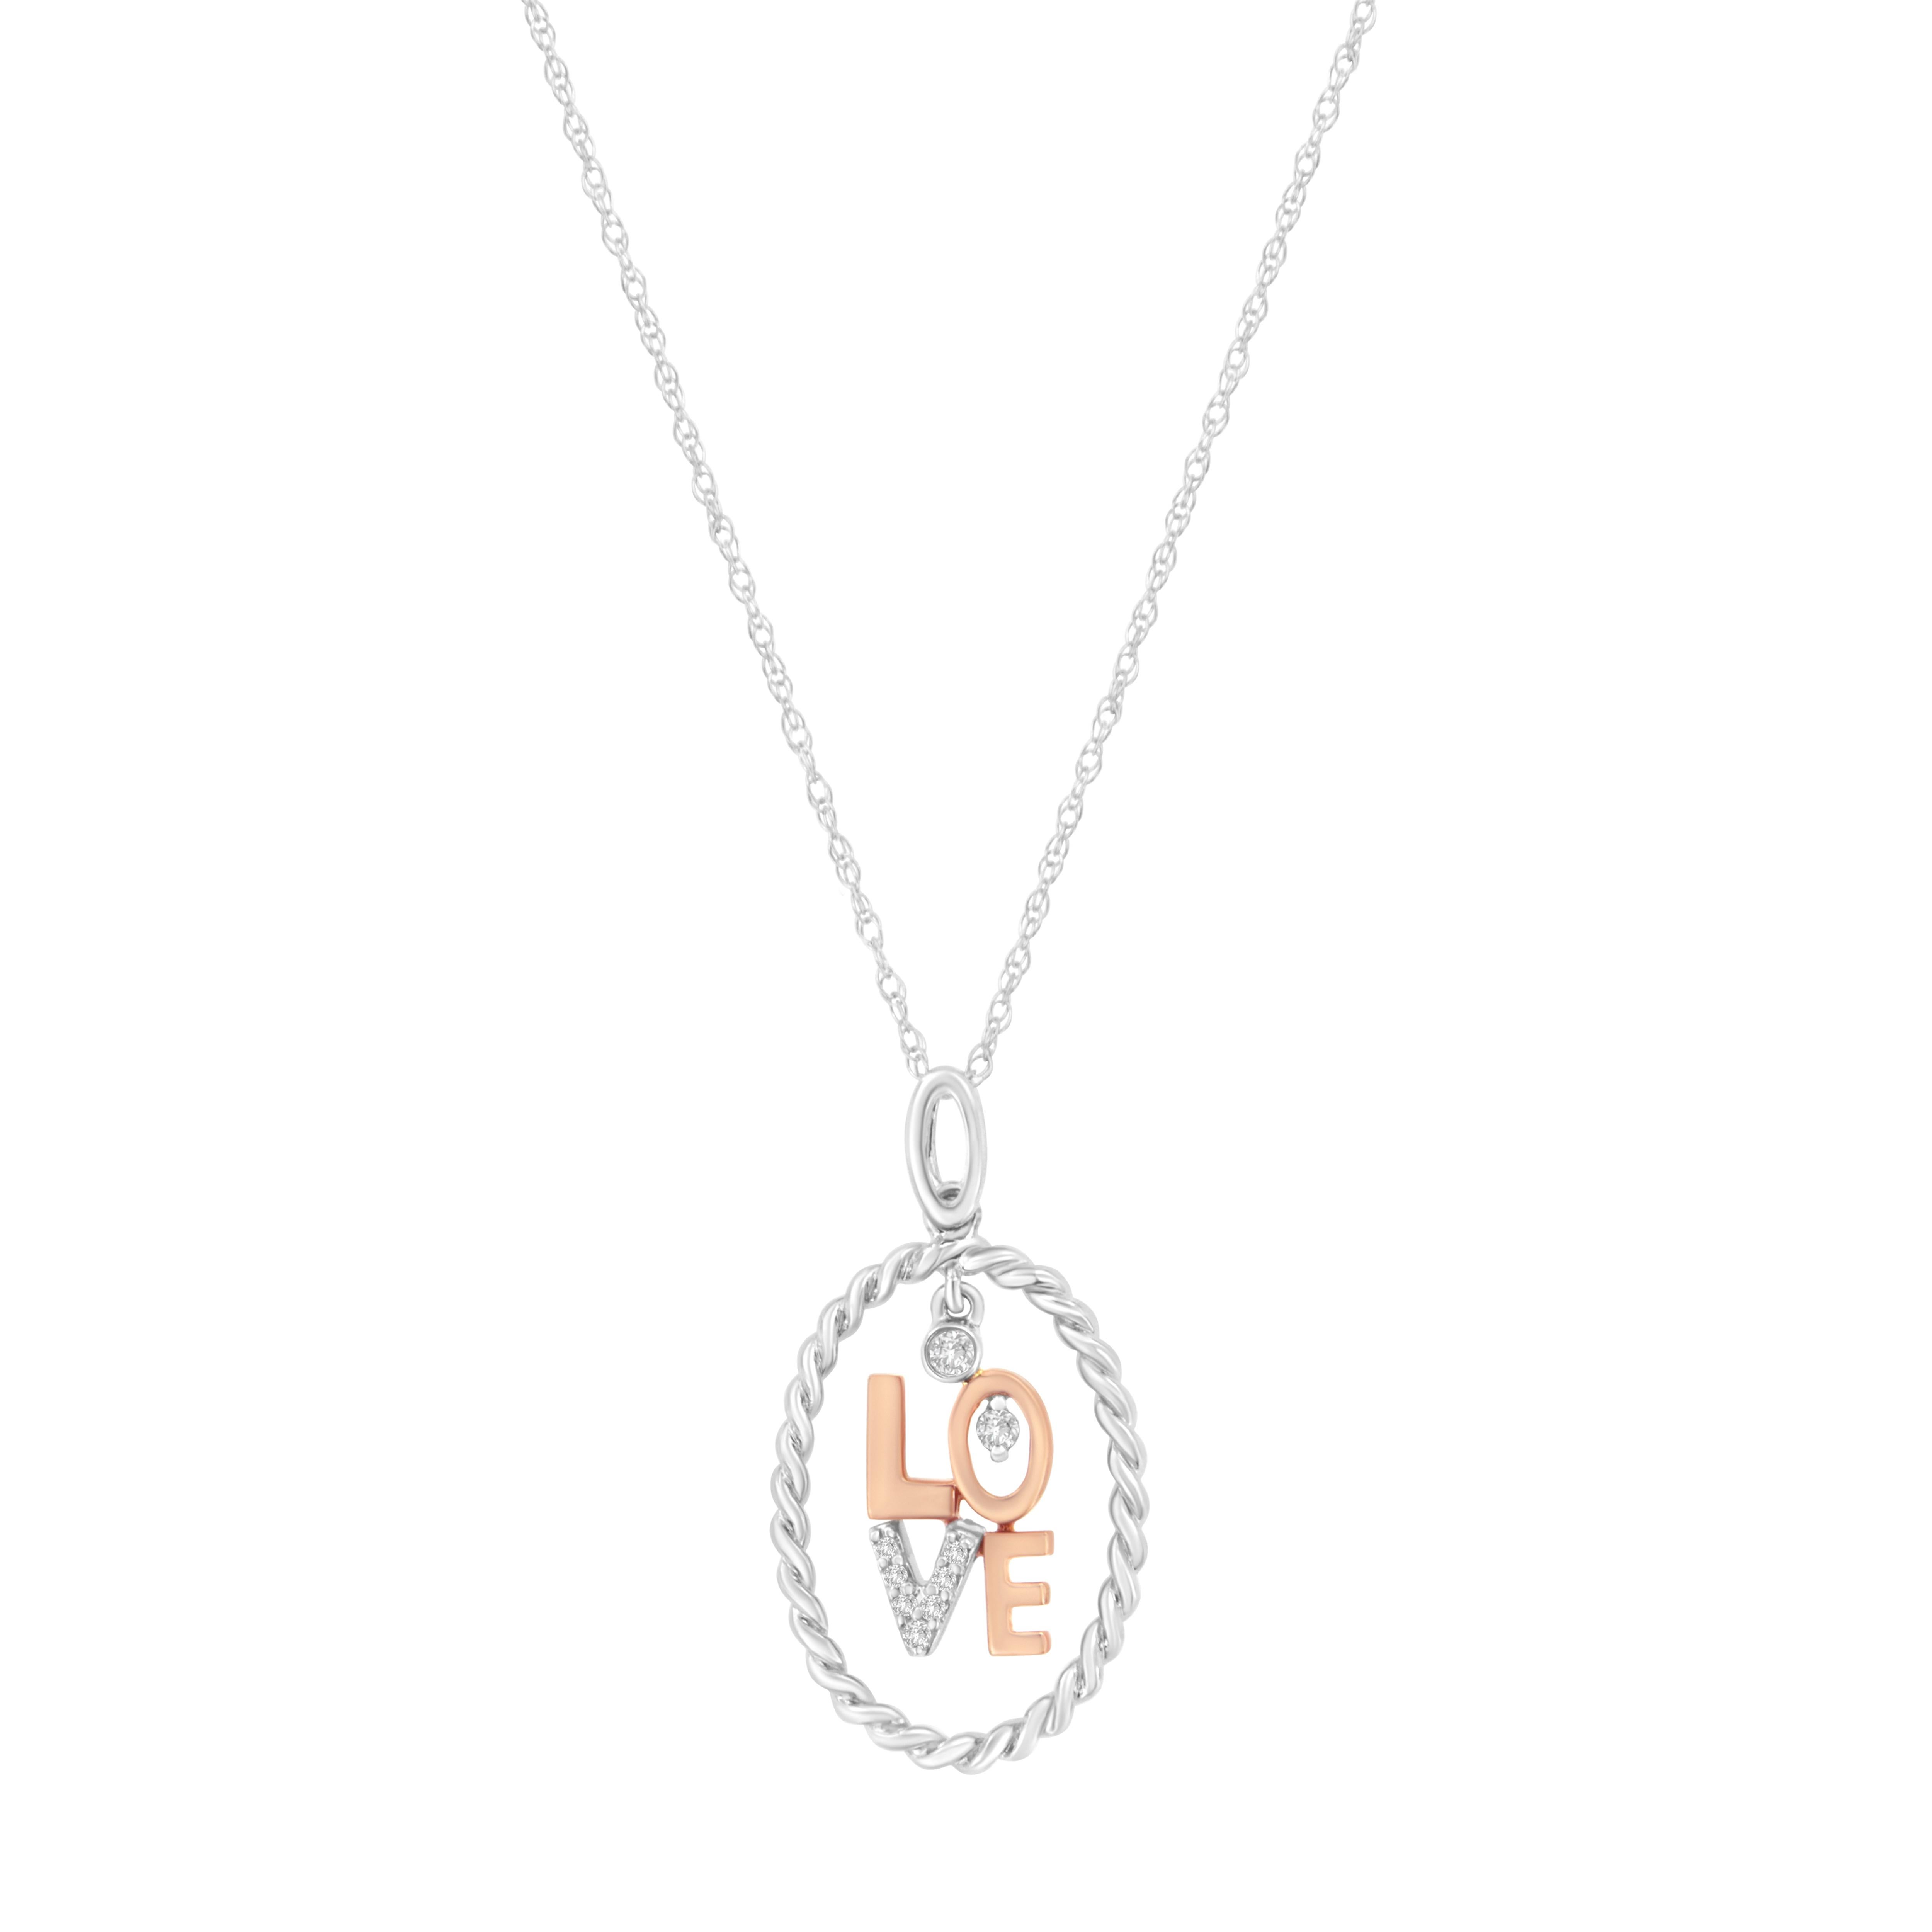 Express love and let love in with this diamond love pendant. Fashioned in 14 karat white and pink gold, this looping open circle is adorned with rope design and the word LOVE is spelled in the center with 9 round cut diamond accent embellishing the